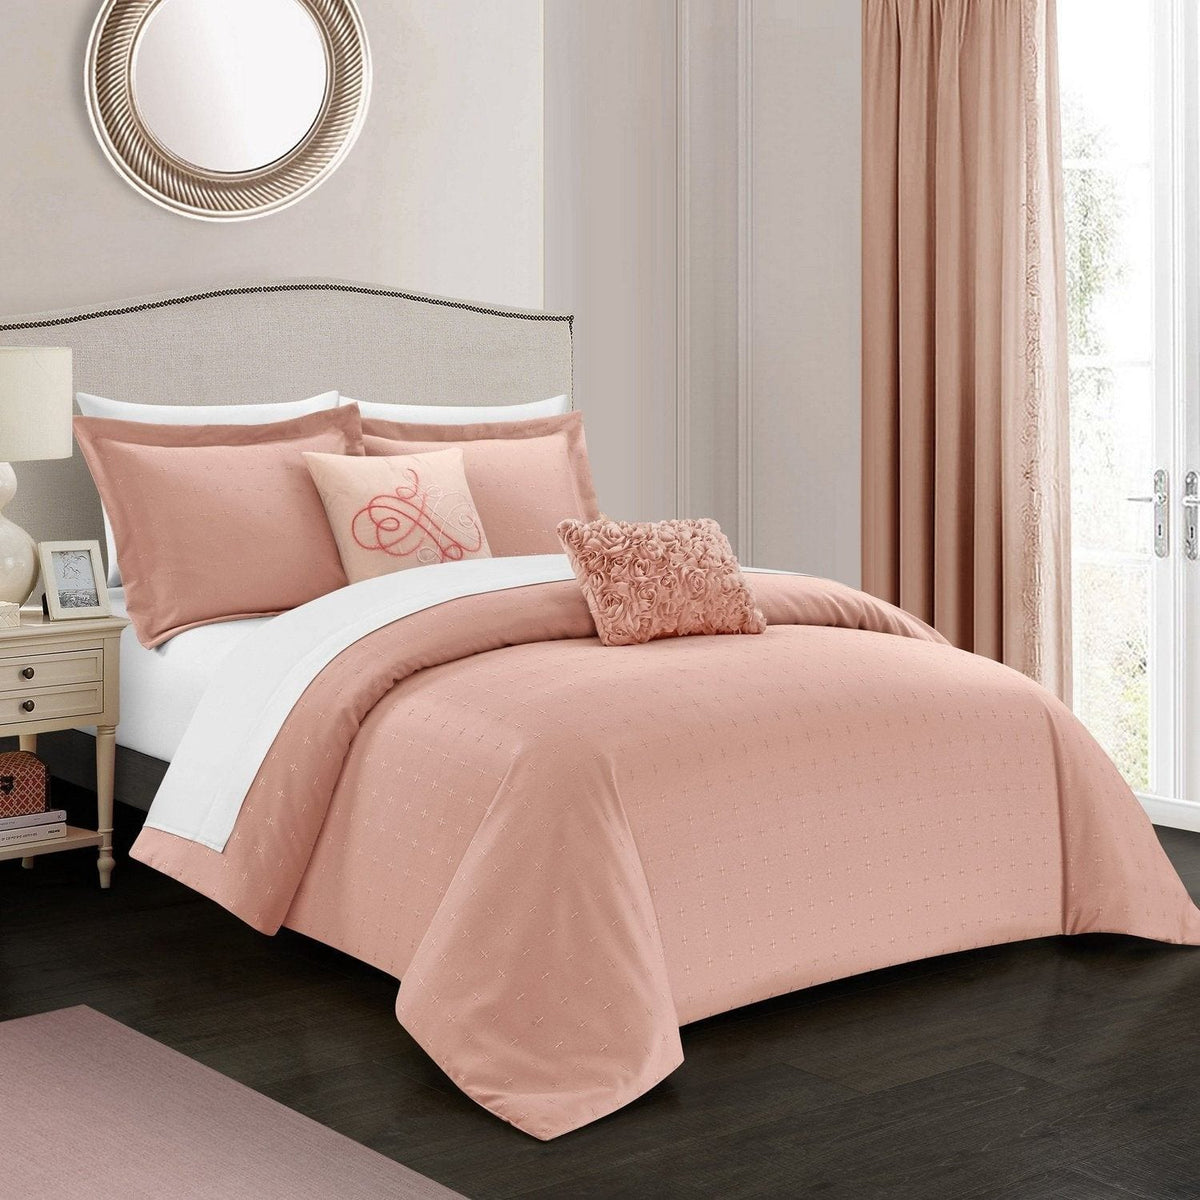 Chic Home Emery 5 Piece Stitched Comforter Set 